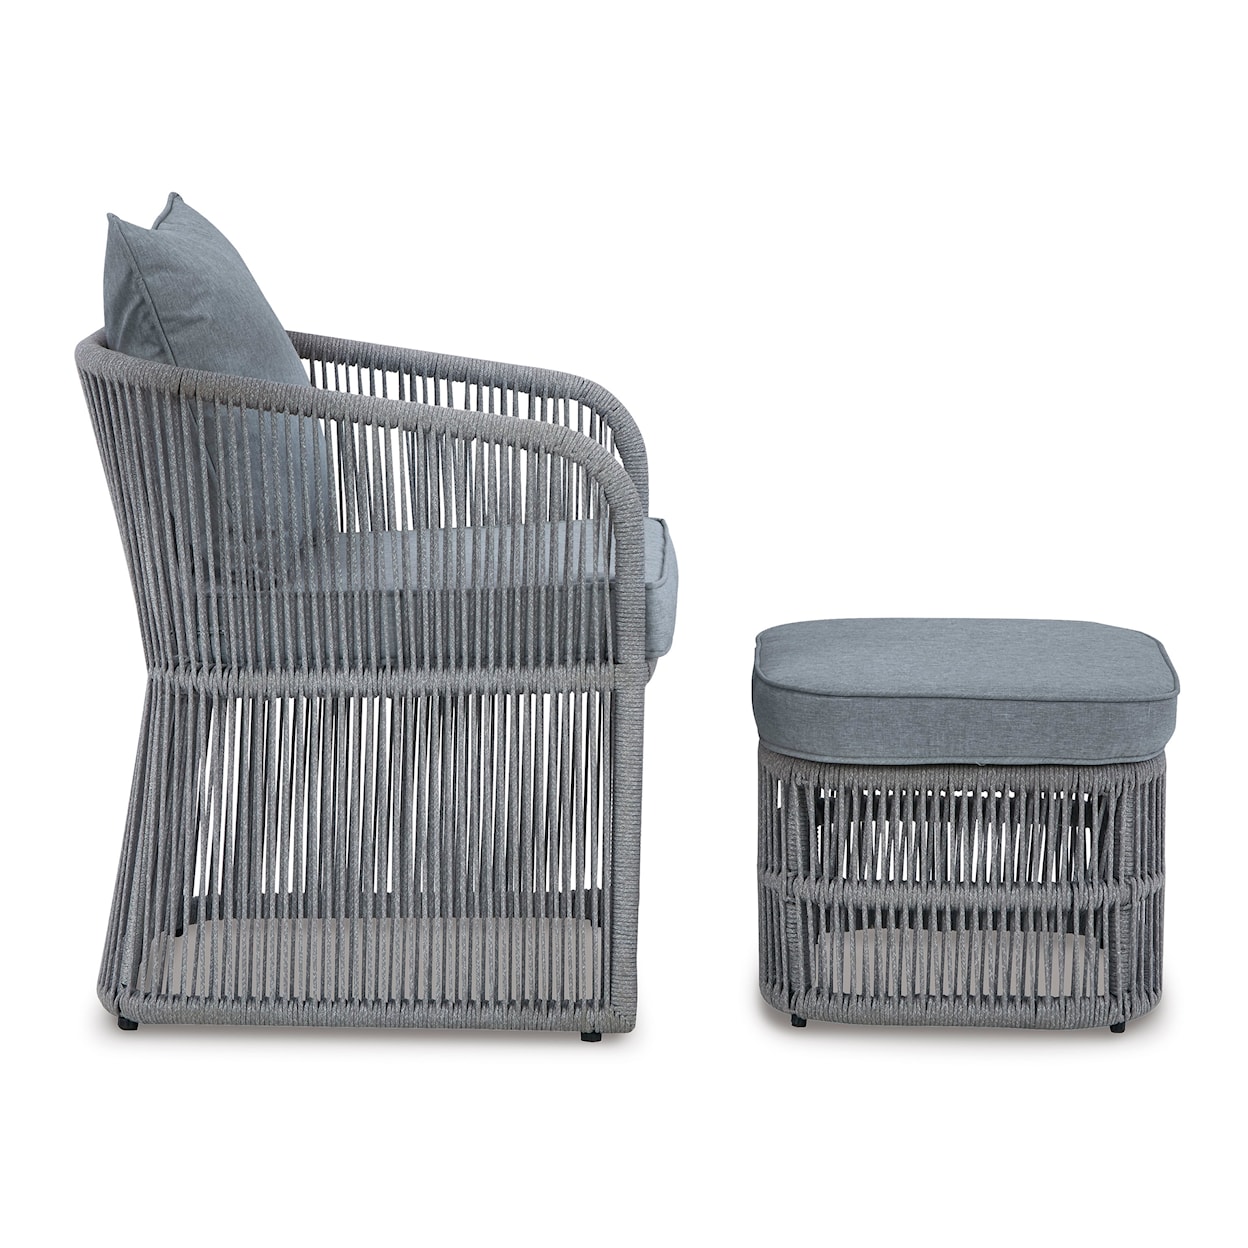 Michael Alan Select Coast Island Outdoor Chair with Ottoman and Side Table